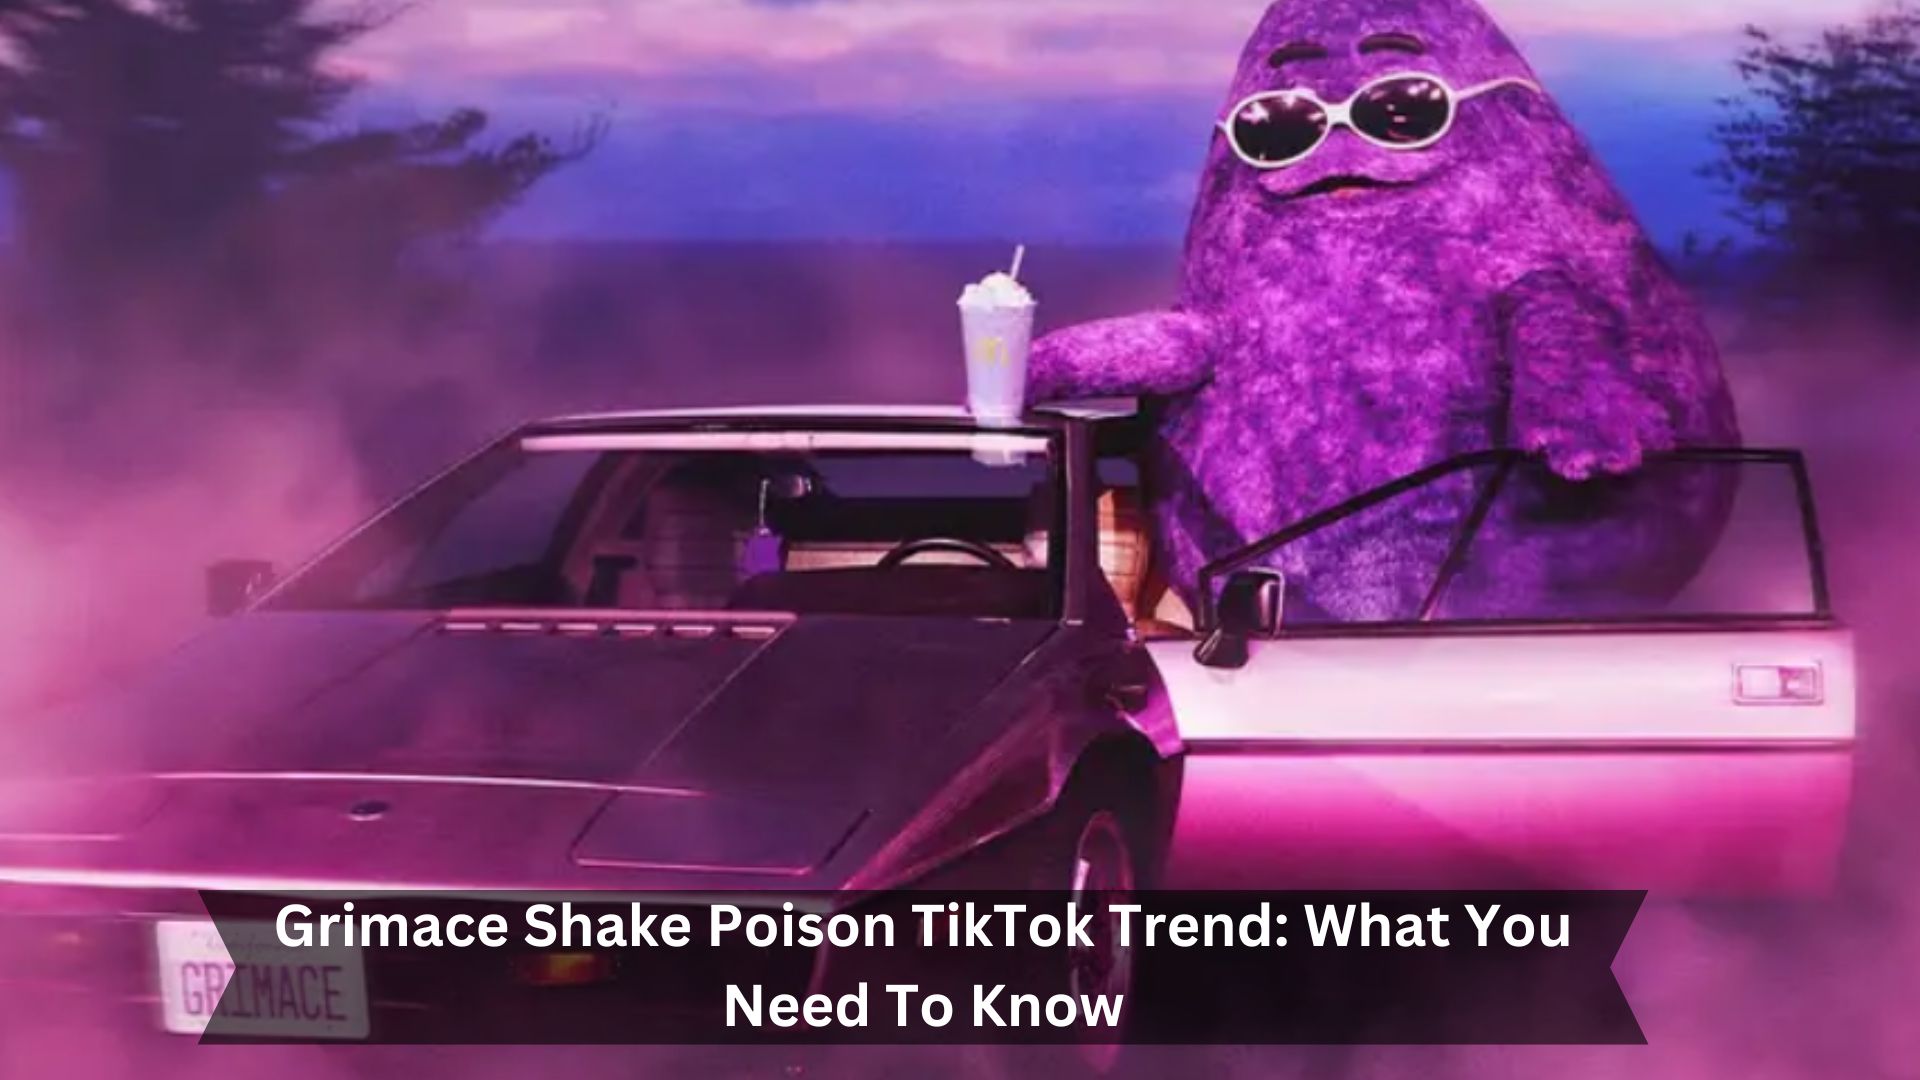 Grimace-Shake-Poison-TikTok-Trend-What-You-Need-To-Know